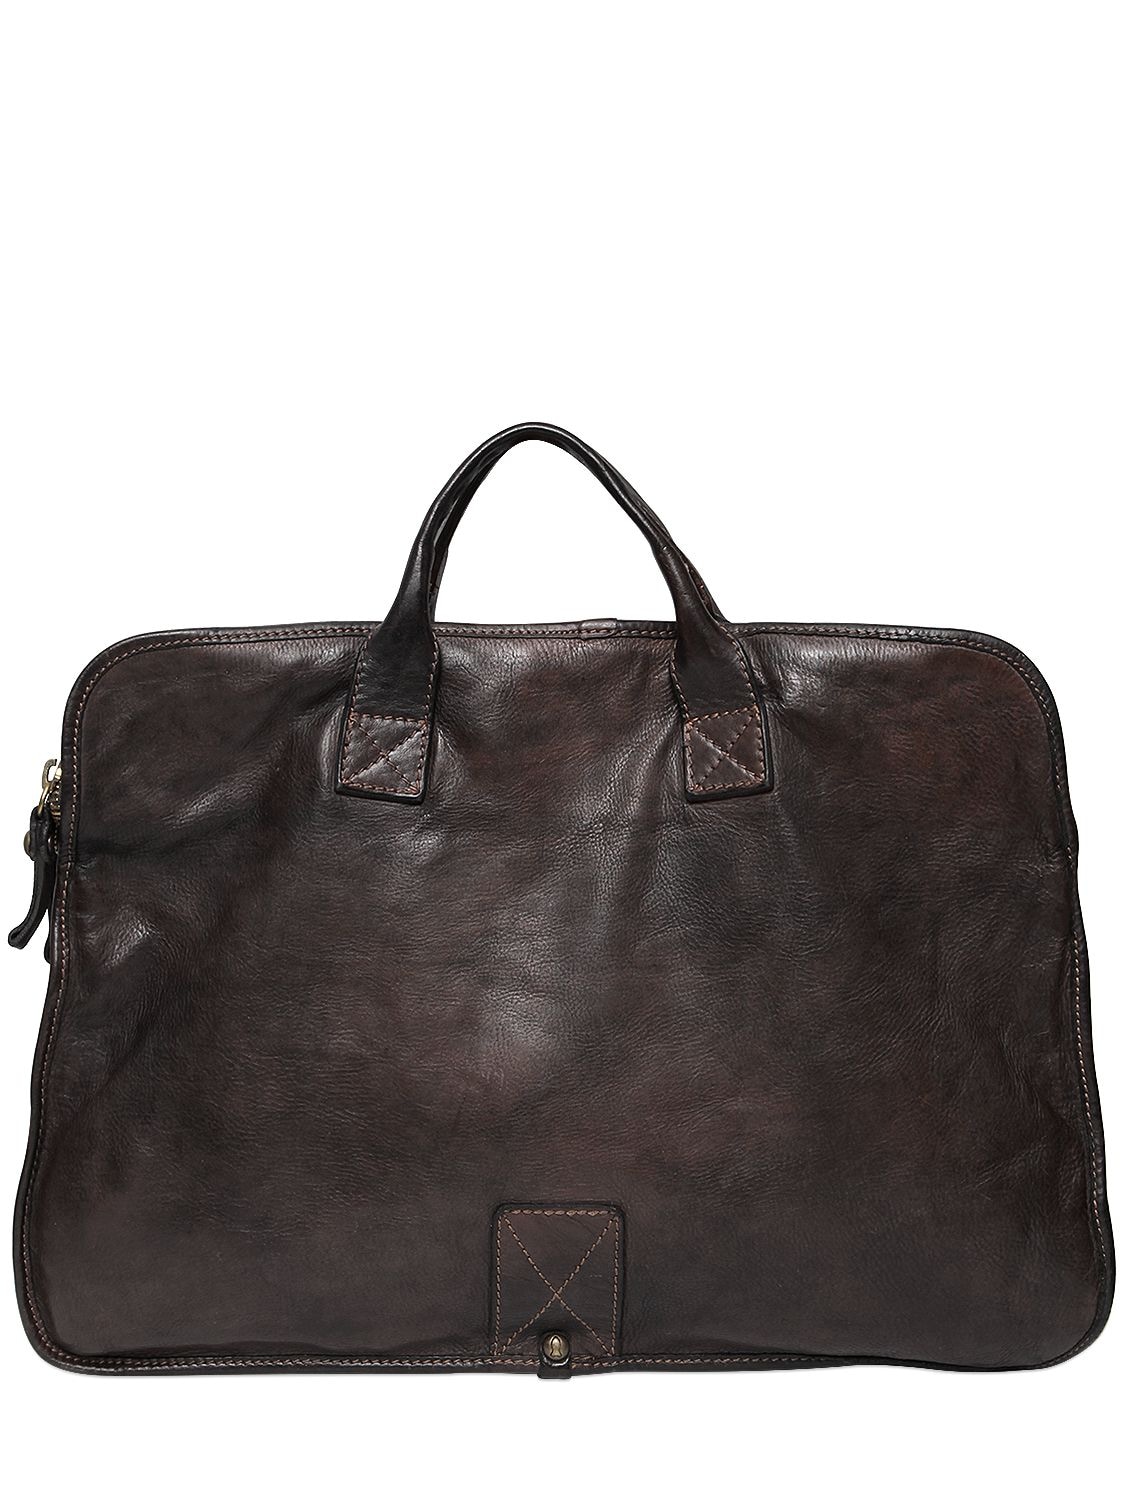 Campomaggi Vintage Effect Leather Briefcase In Grey Brown